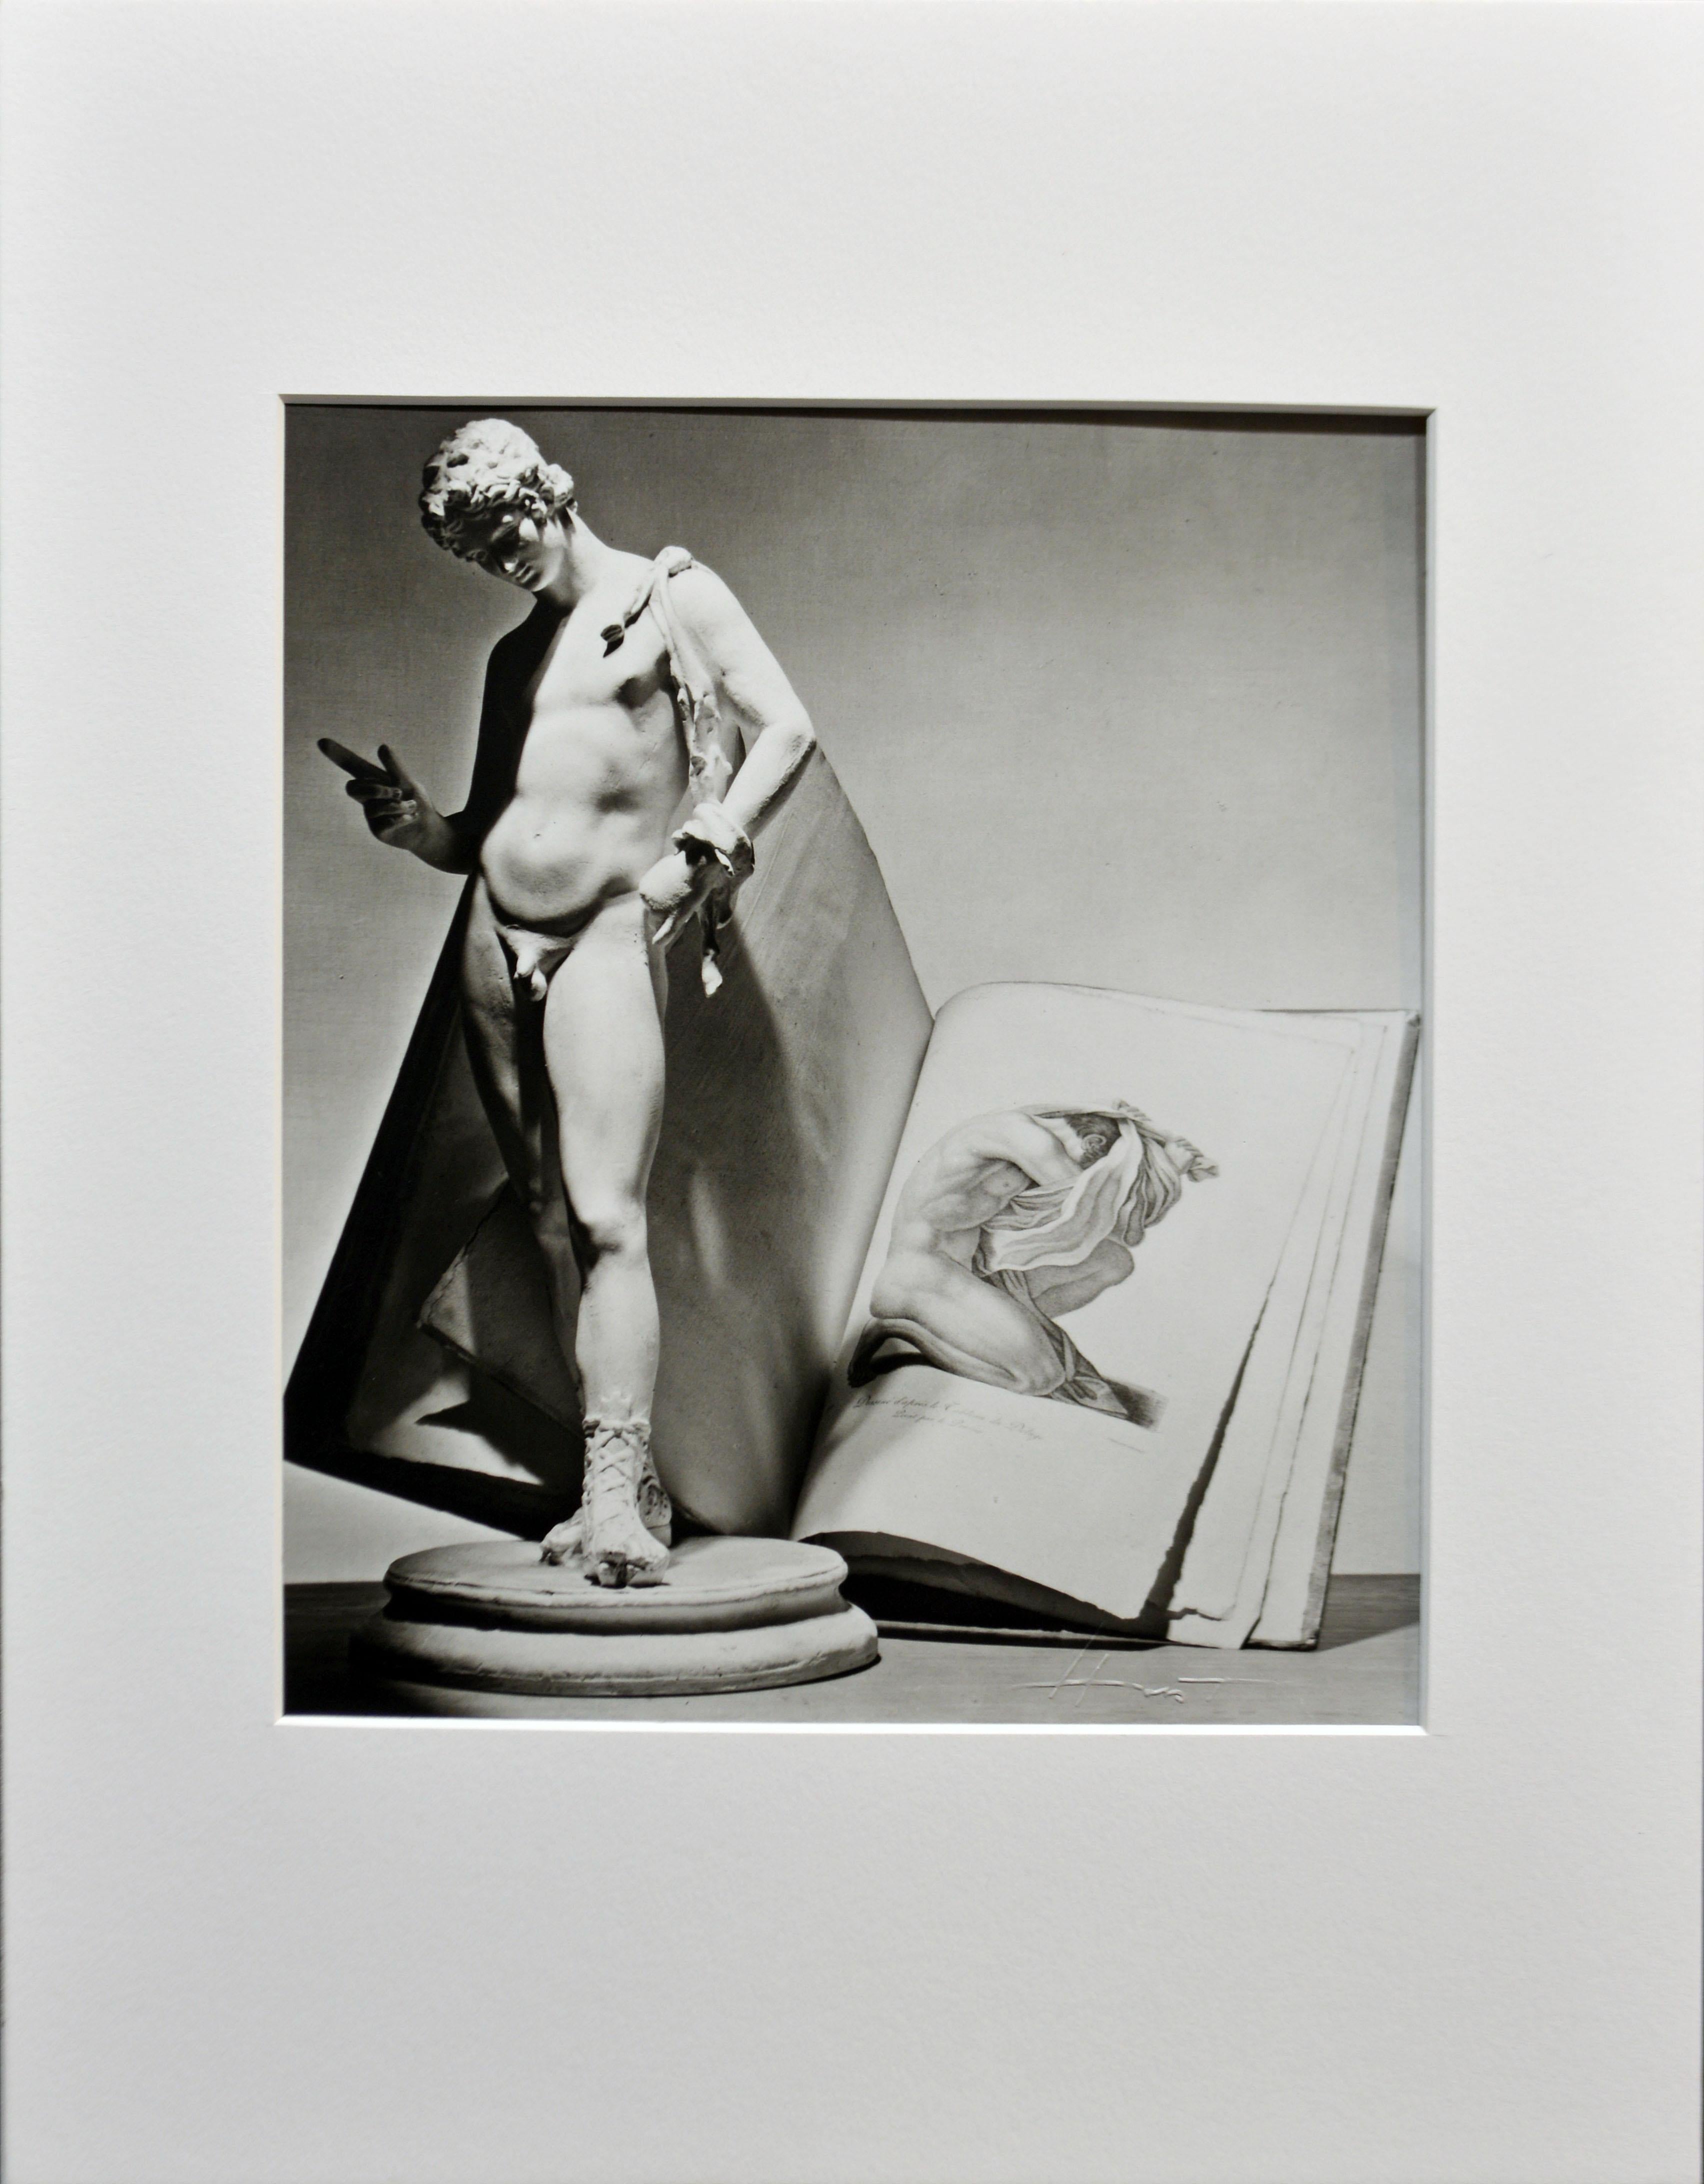 Horst P. Horst (1906-1999)
Statue with Book, Paris 1938
Gelatin silver print, printed later. Image: 7.5 x 8.25 in / 19 x 22 cm. Mat: 11 x 14 in / 28 x 36 cm.
Signed, blind stamped, titled and numbered at verso.

Horst P. Horst 
Horst P. Horst